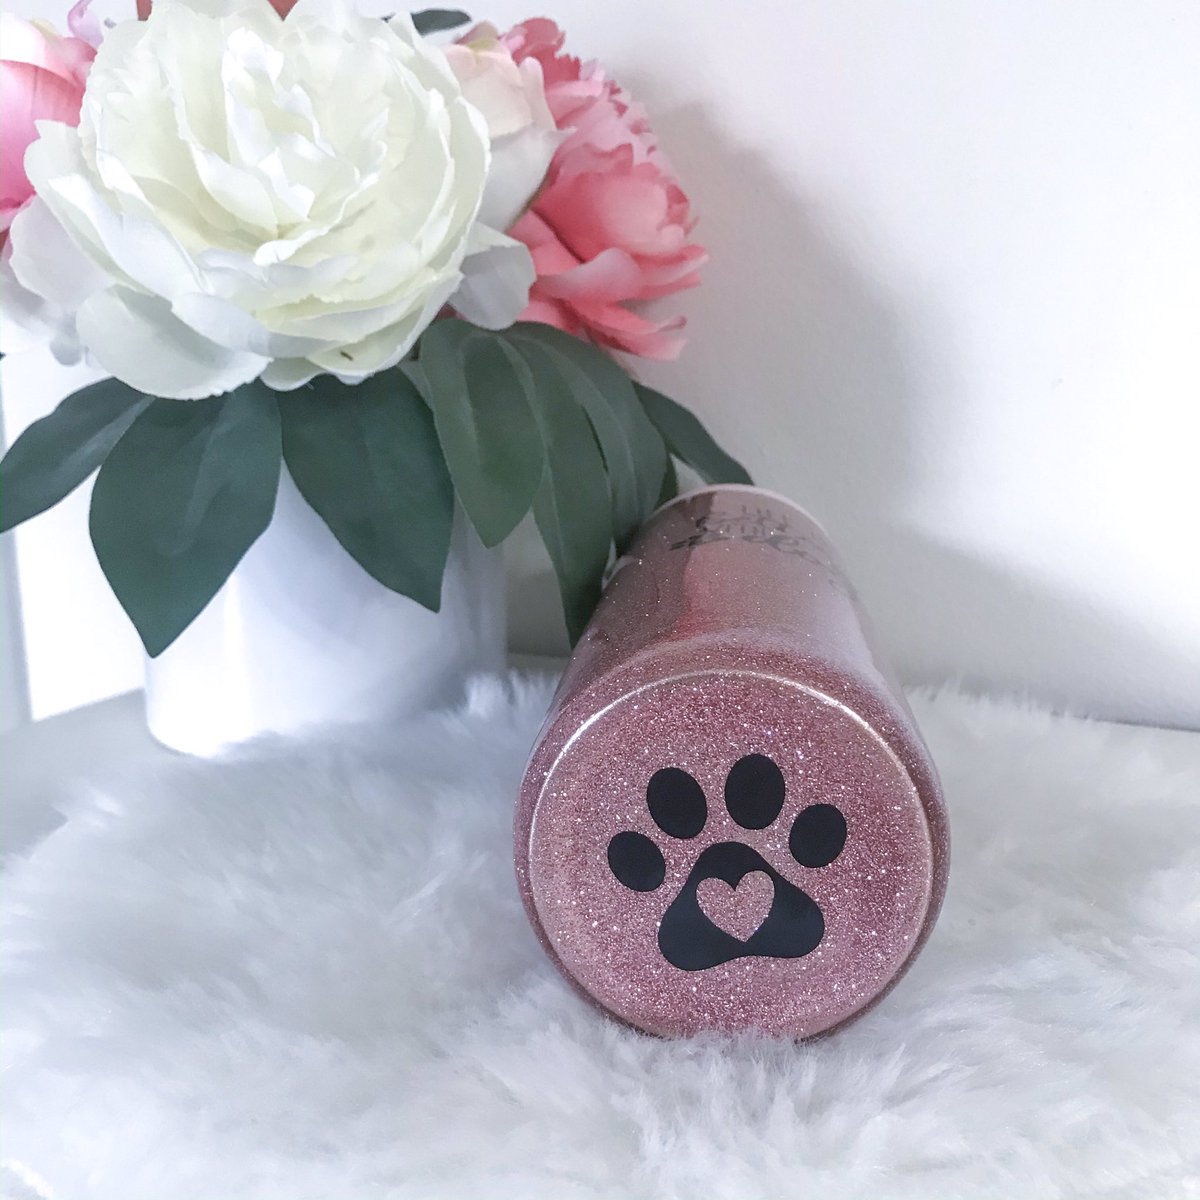 Life is better with dogs 🐾🥰 etsy.me/2UNmxDo #dogsoftwitter #betterwithdogs #pawprint #dogtumbler #customtumblers #reusabletumblers #tumblersoftwitter #etsyshop #etsy #cricut #cricutmade #simplyloudesigns